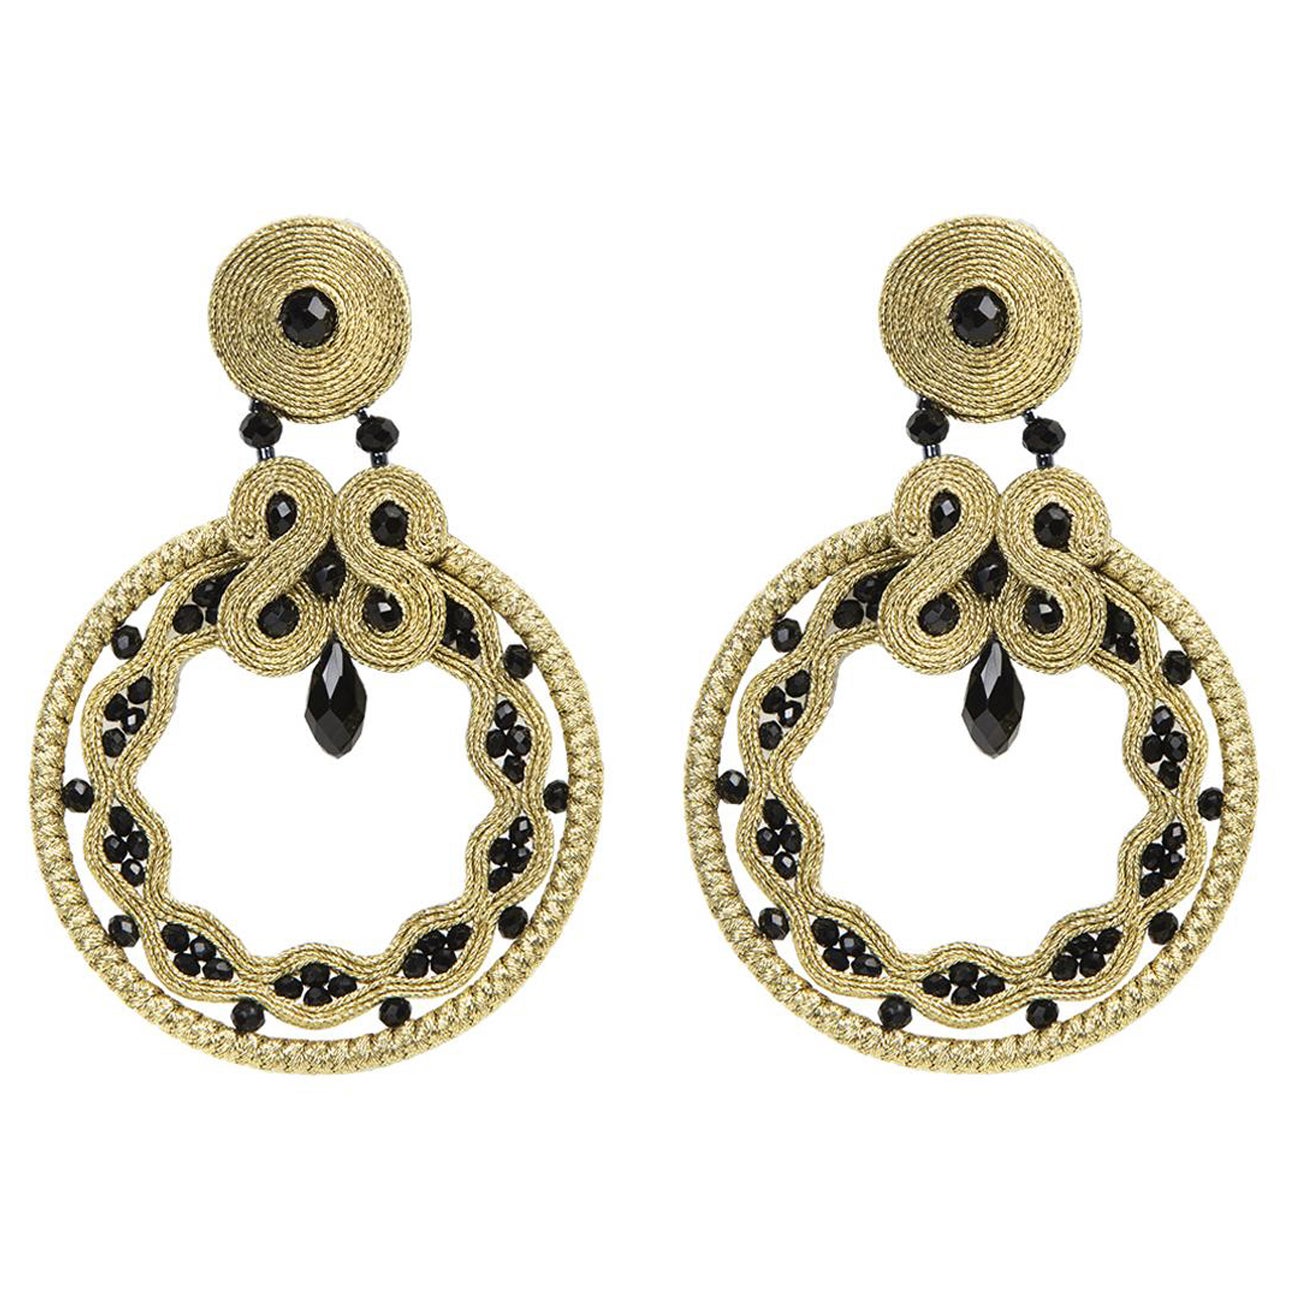 Miabril Ocher & Jet Soutache Earrings with Silk Rayon, Beads & Silver Closure For Sale